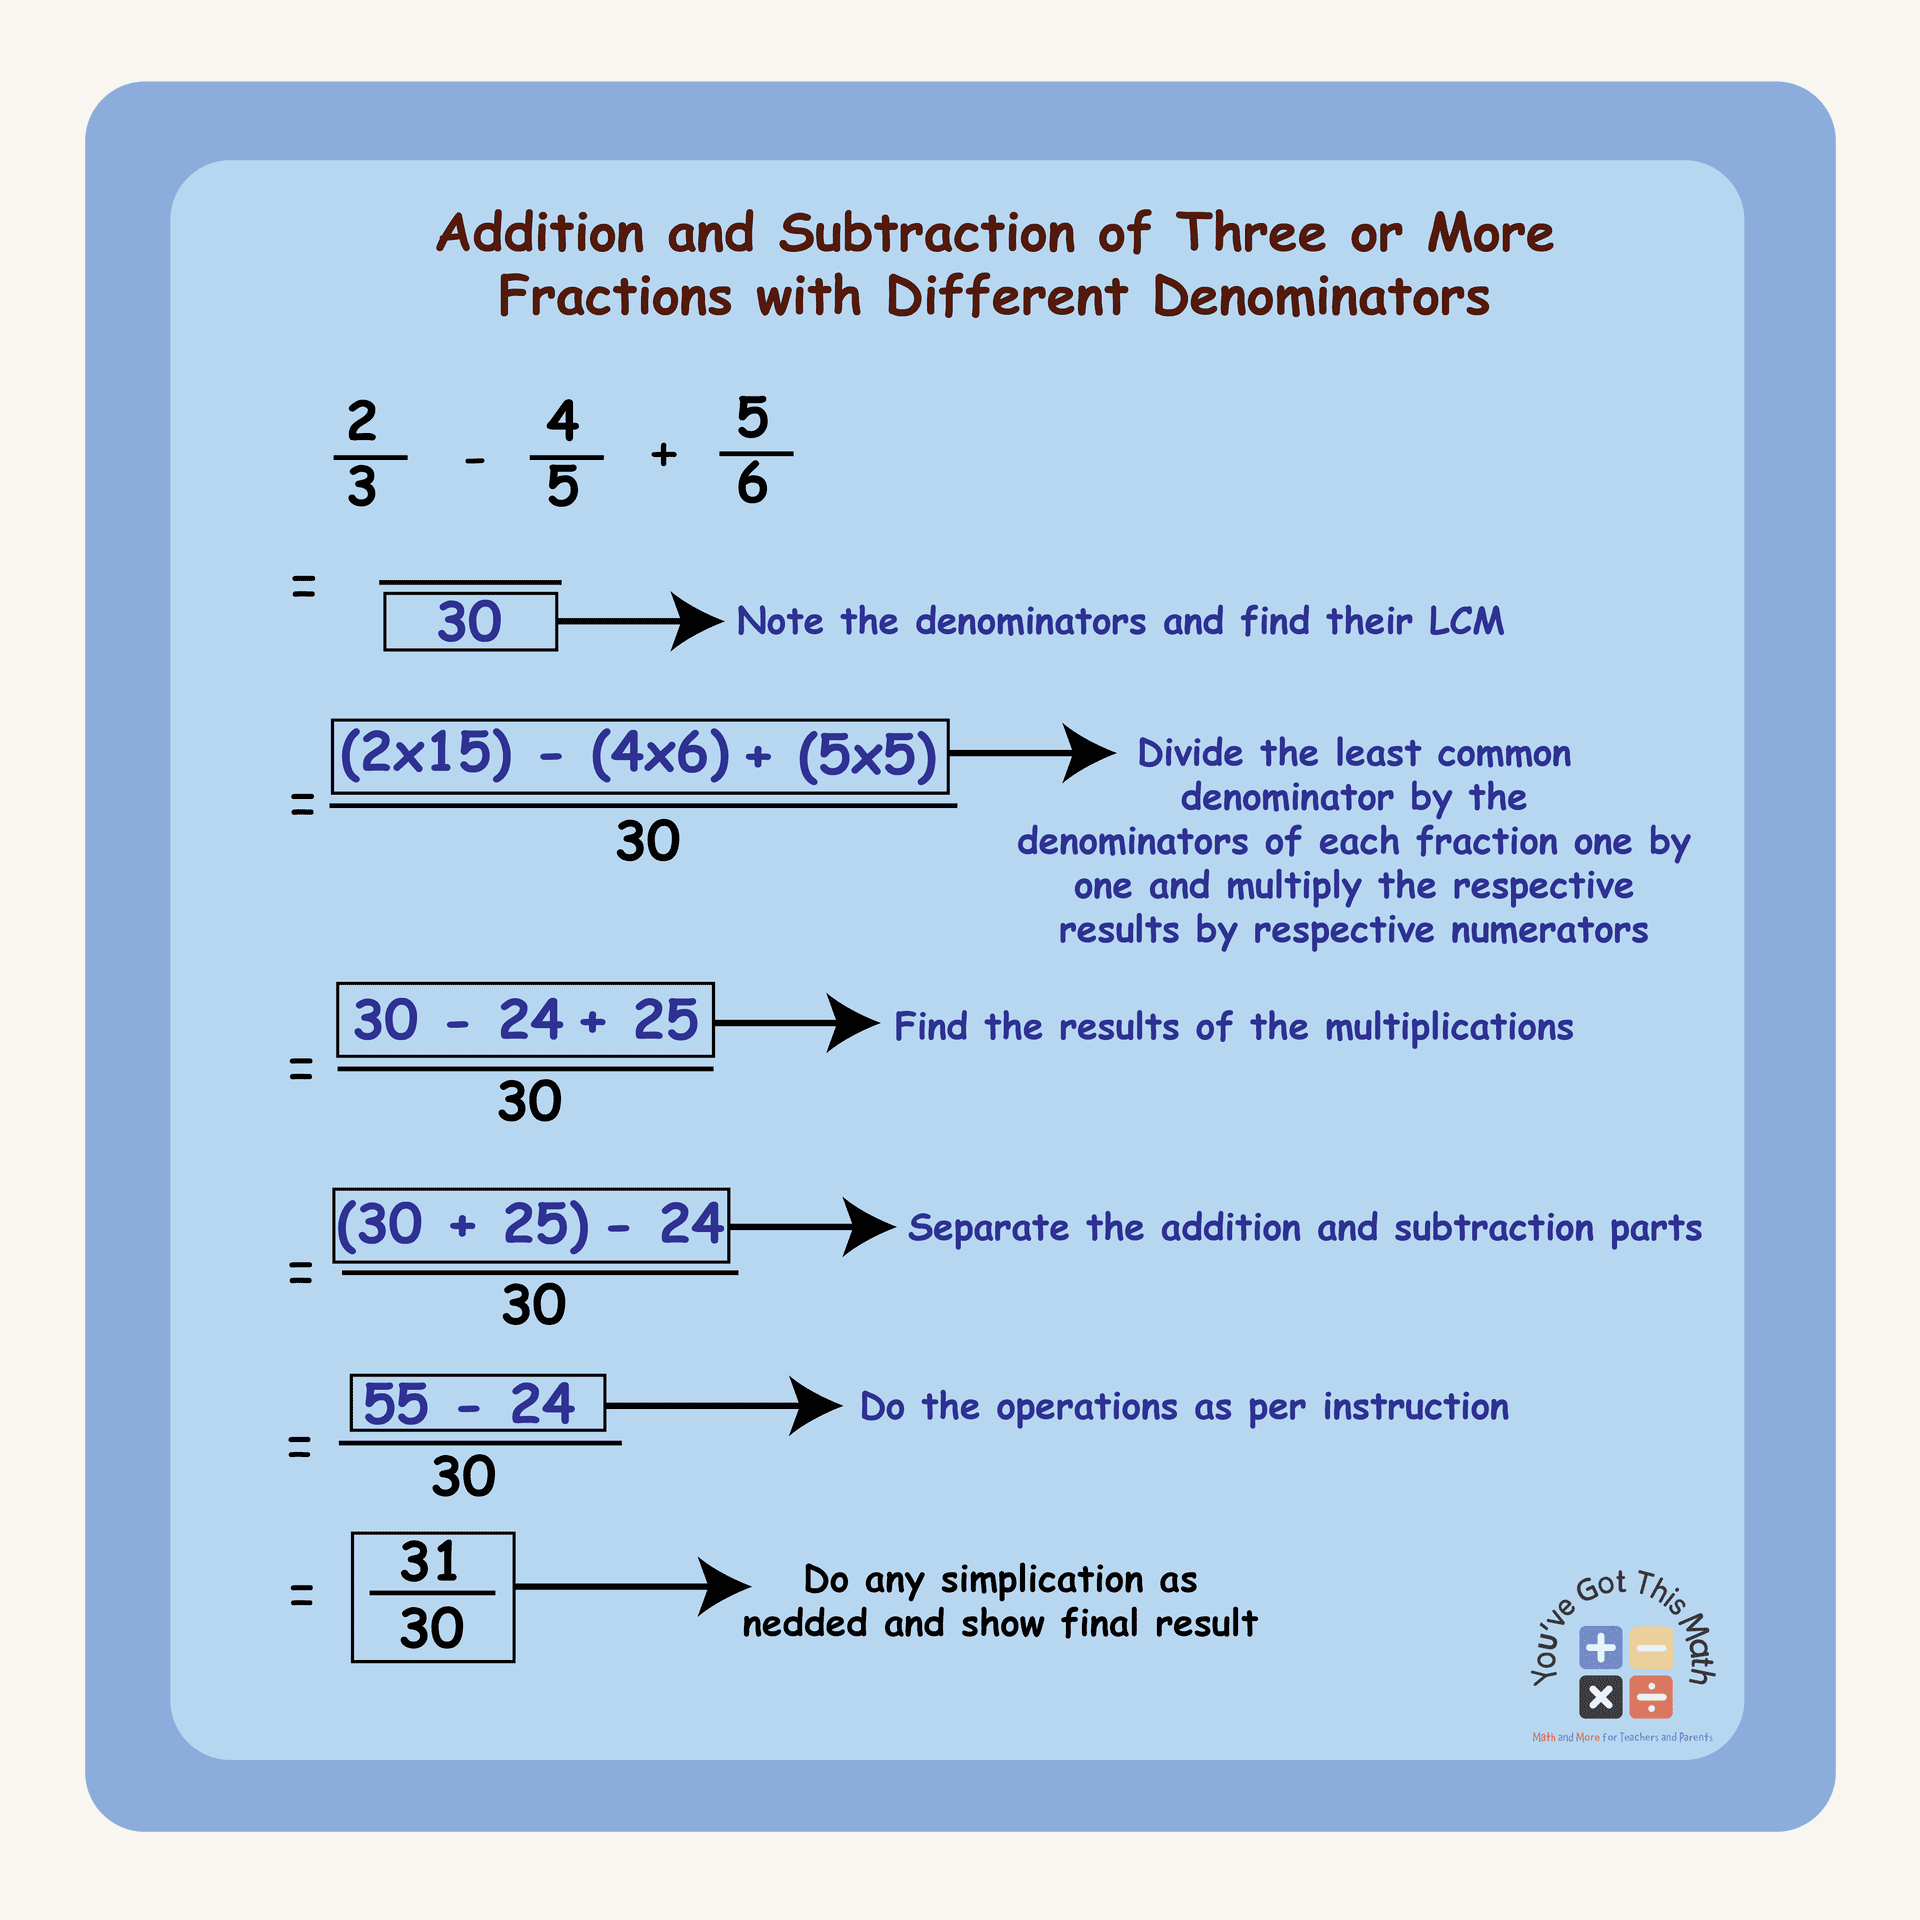 Addition and Subtraction of Three Fractions